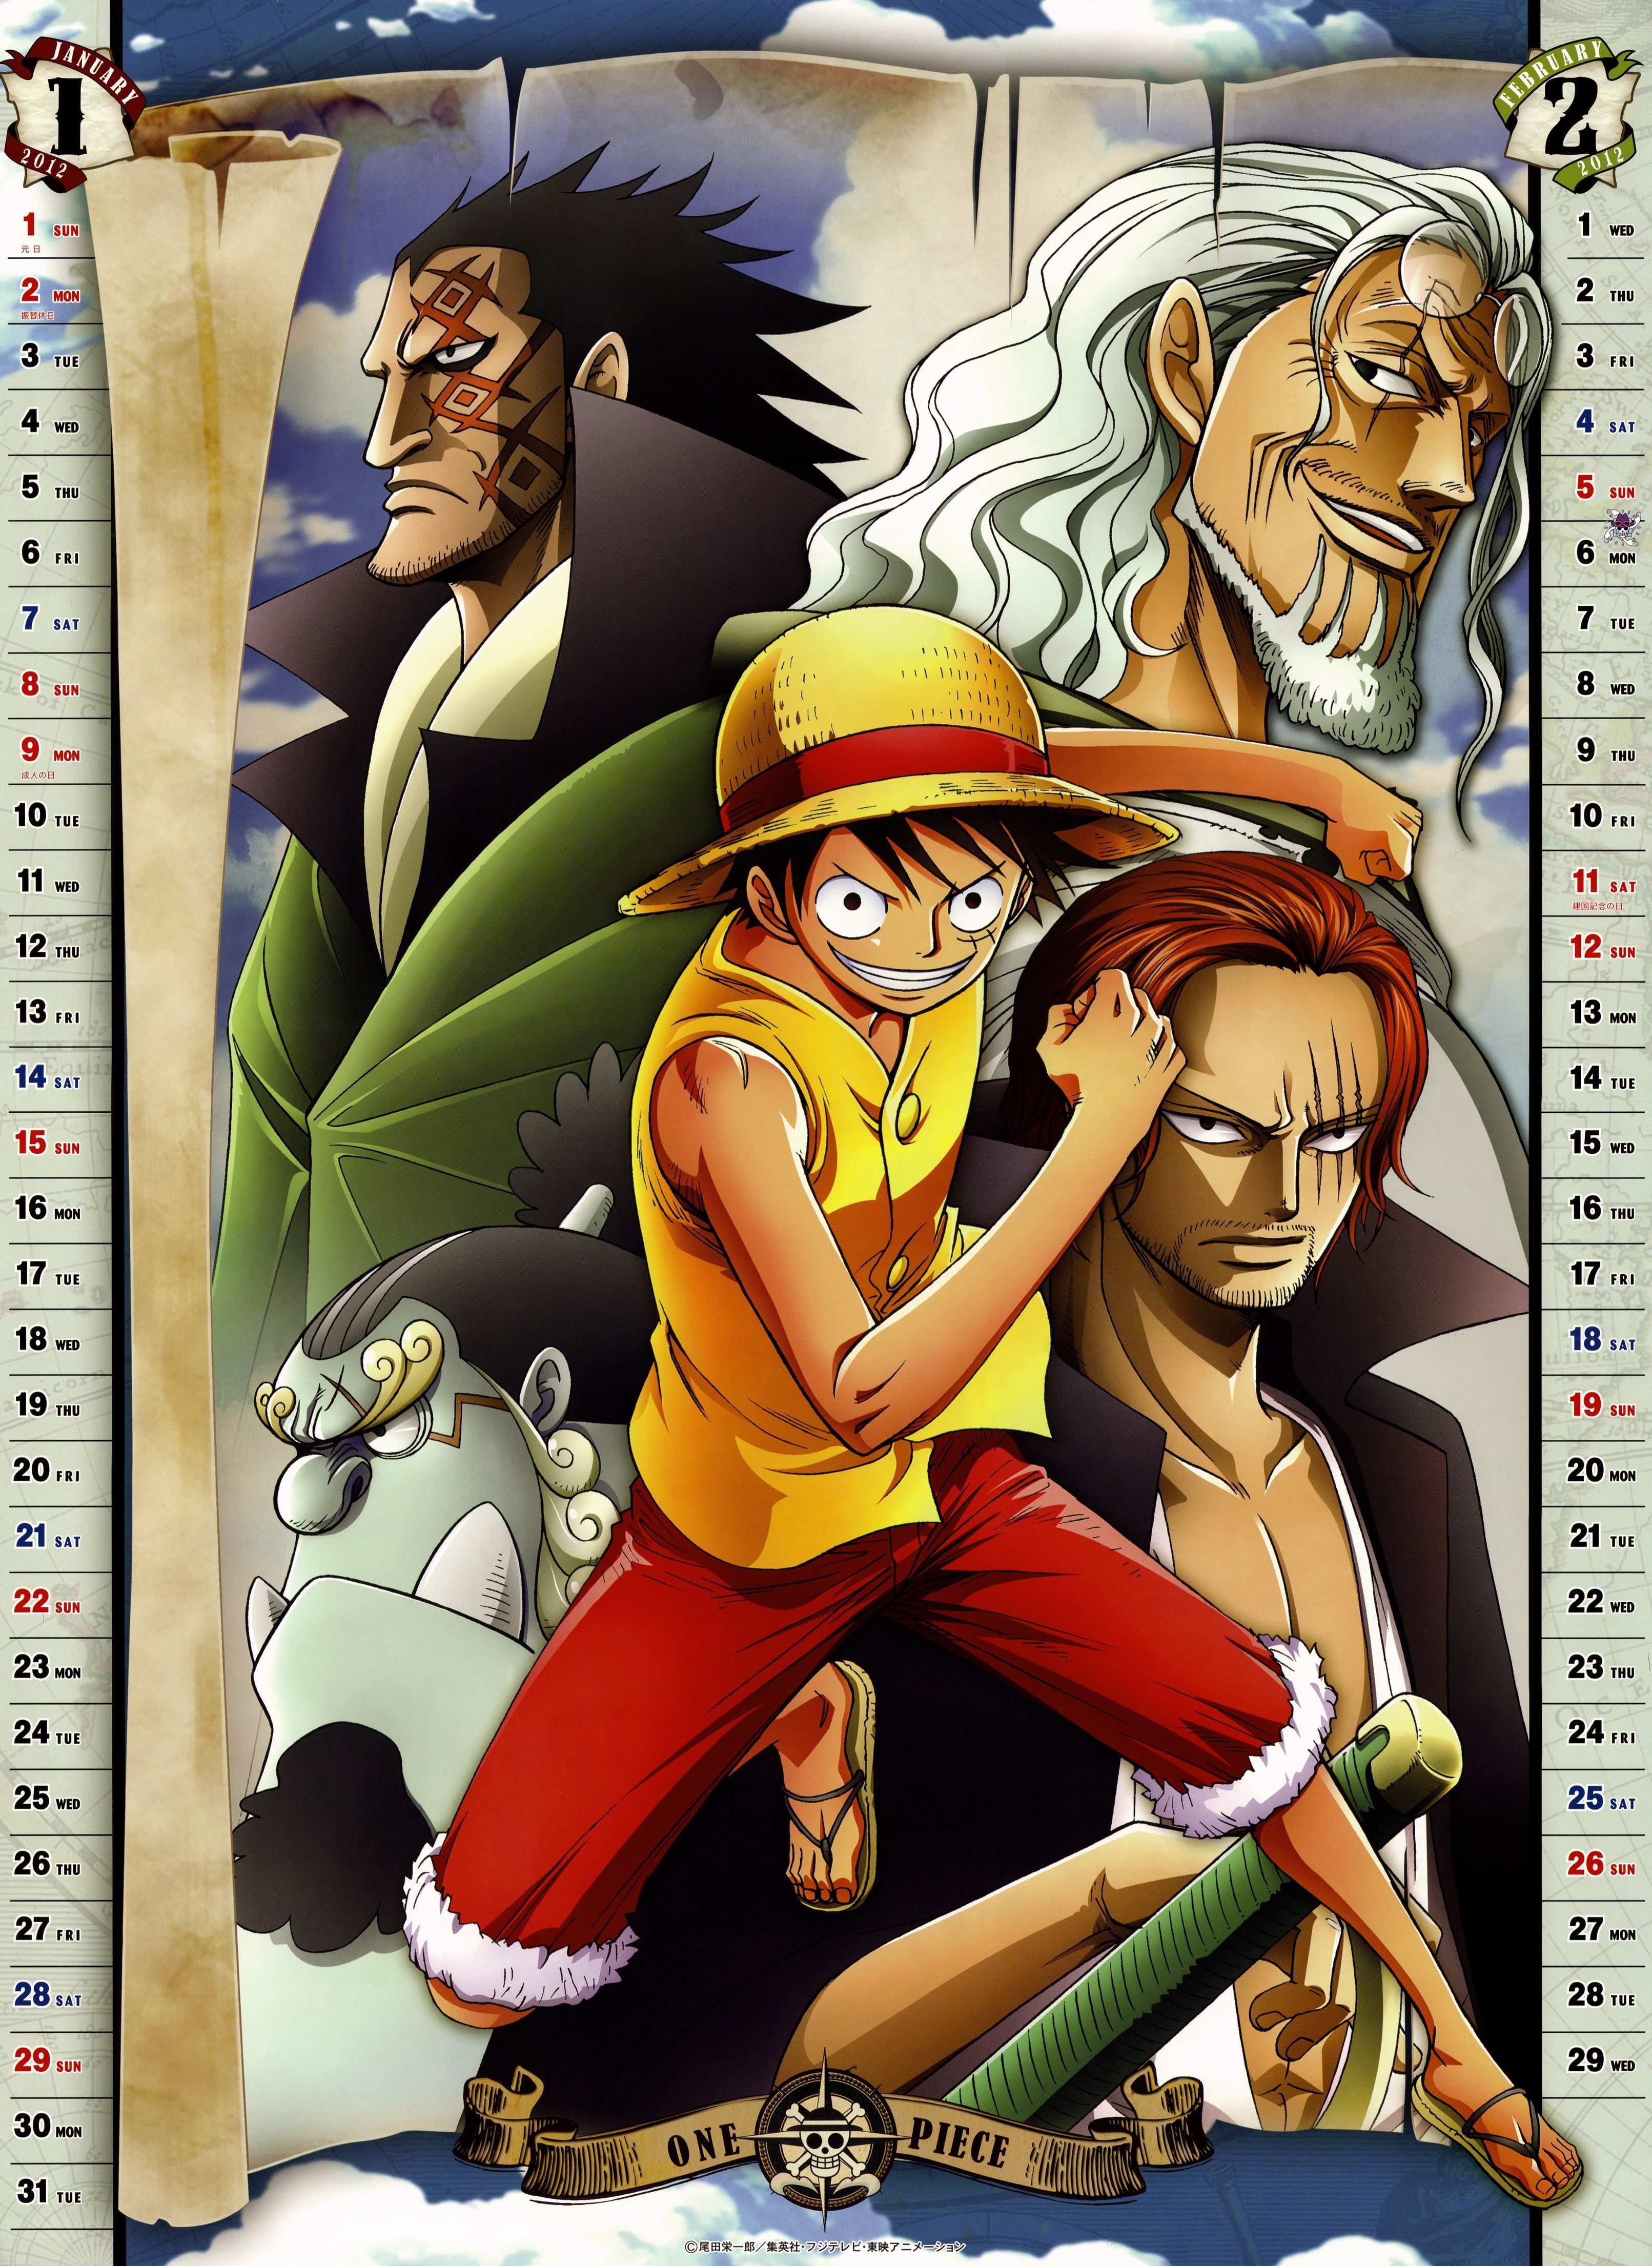 One Piece Wallpapers Android - Wallpaperist